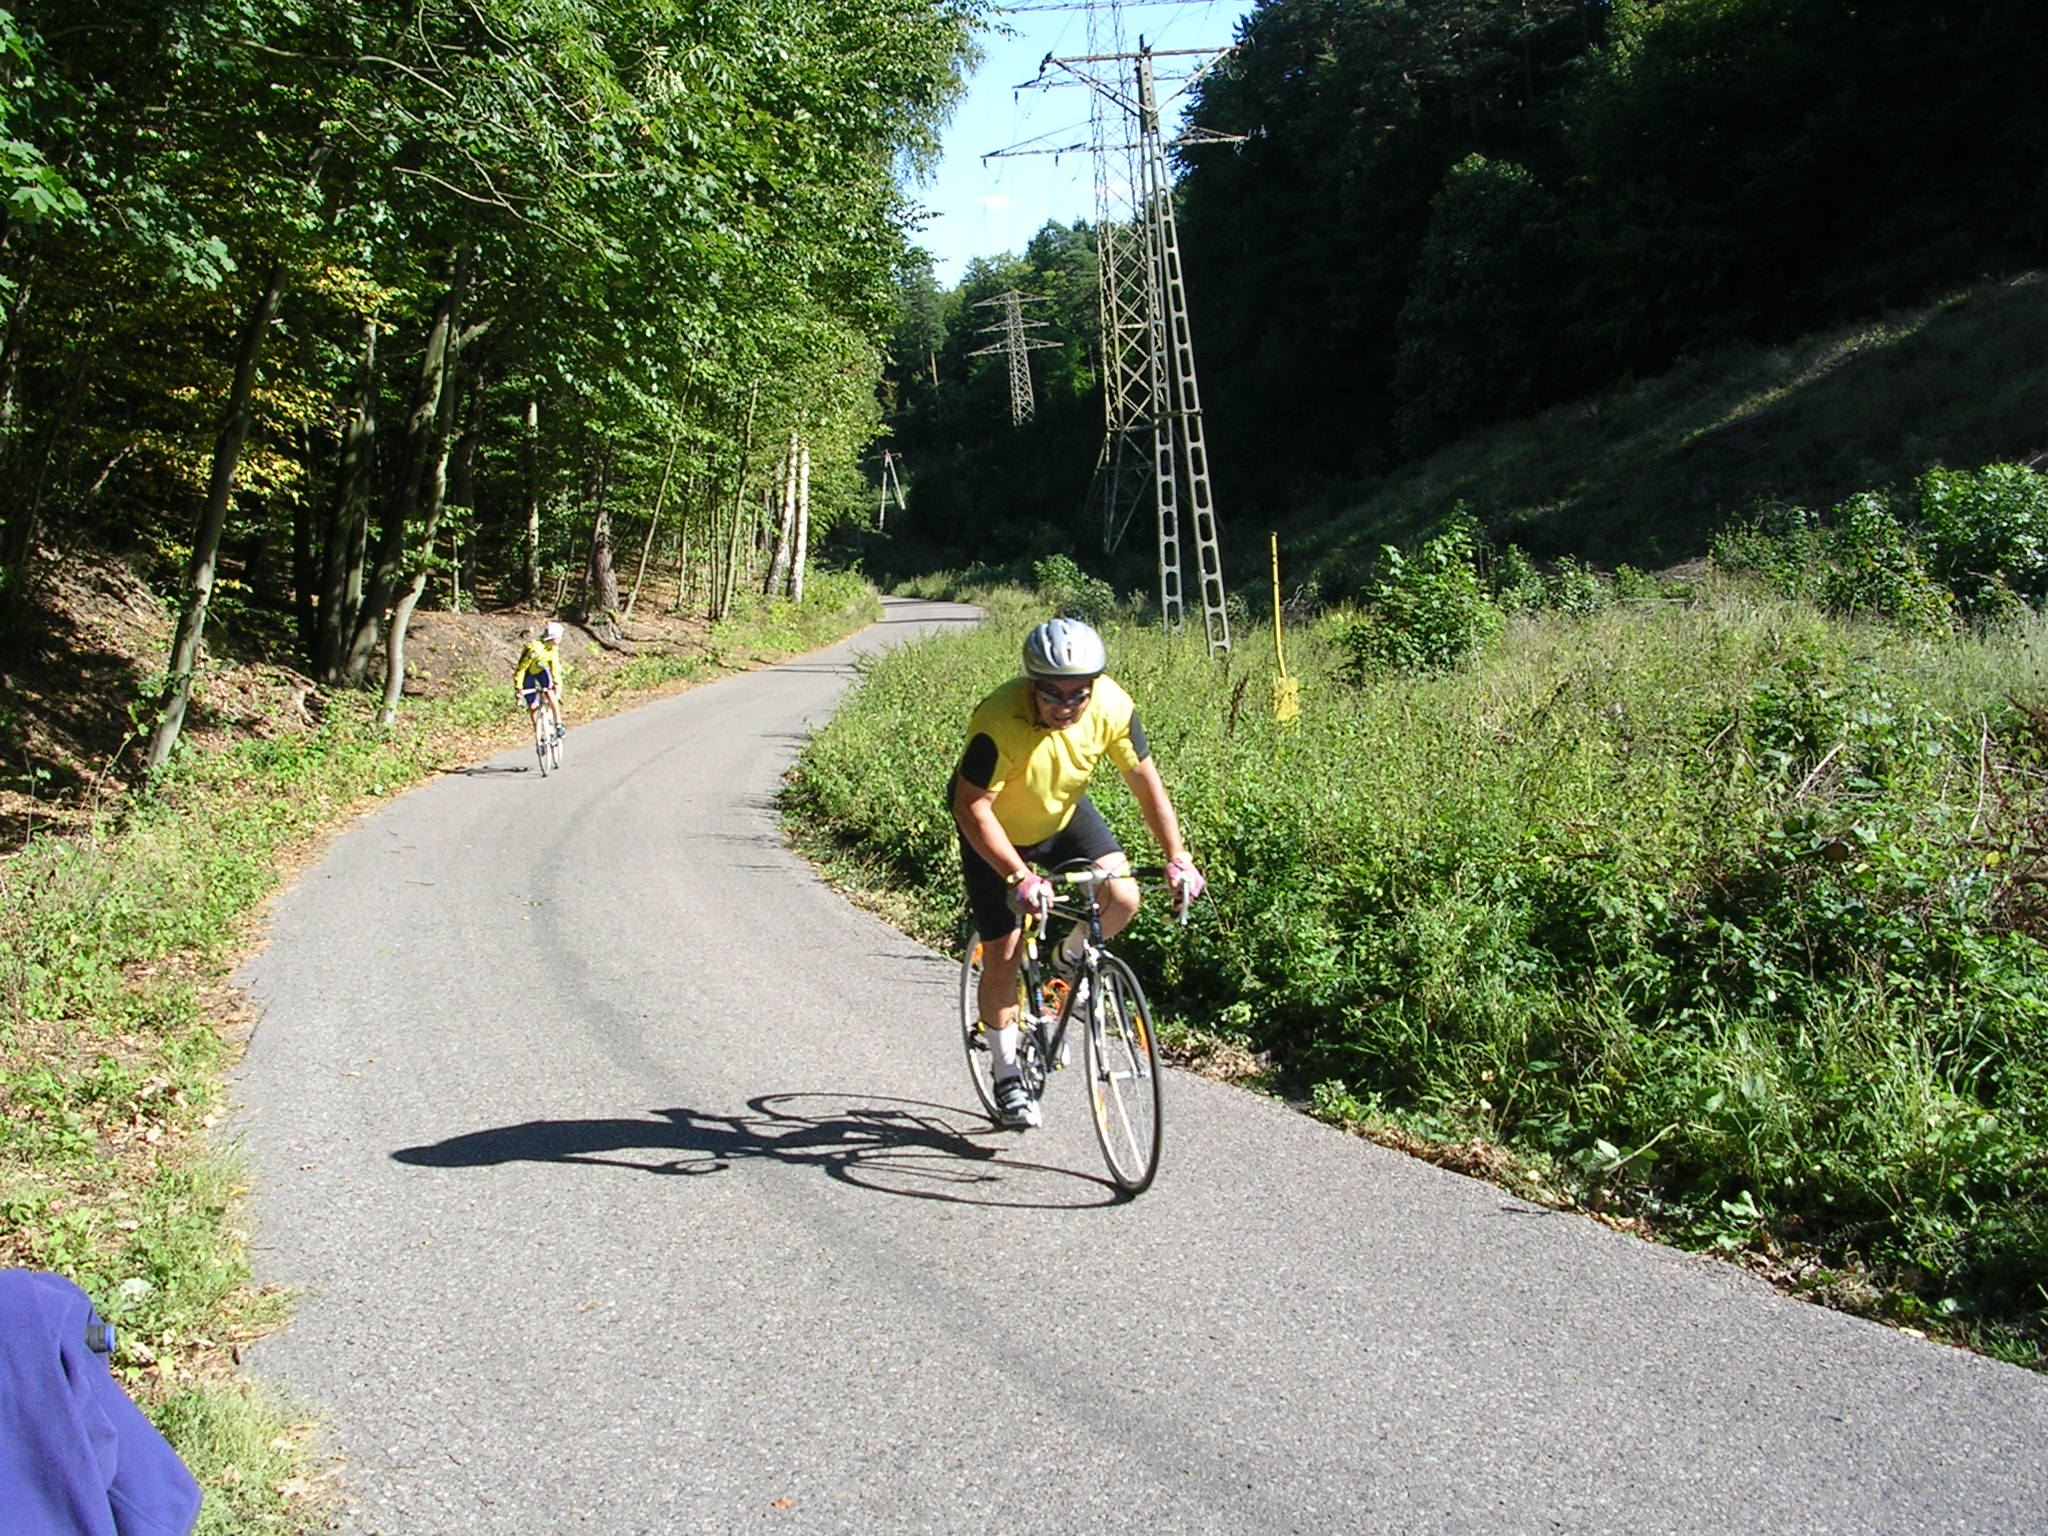 two people on bicycles riding down a road